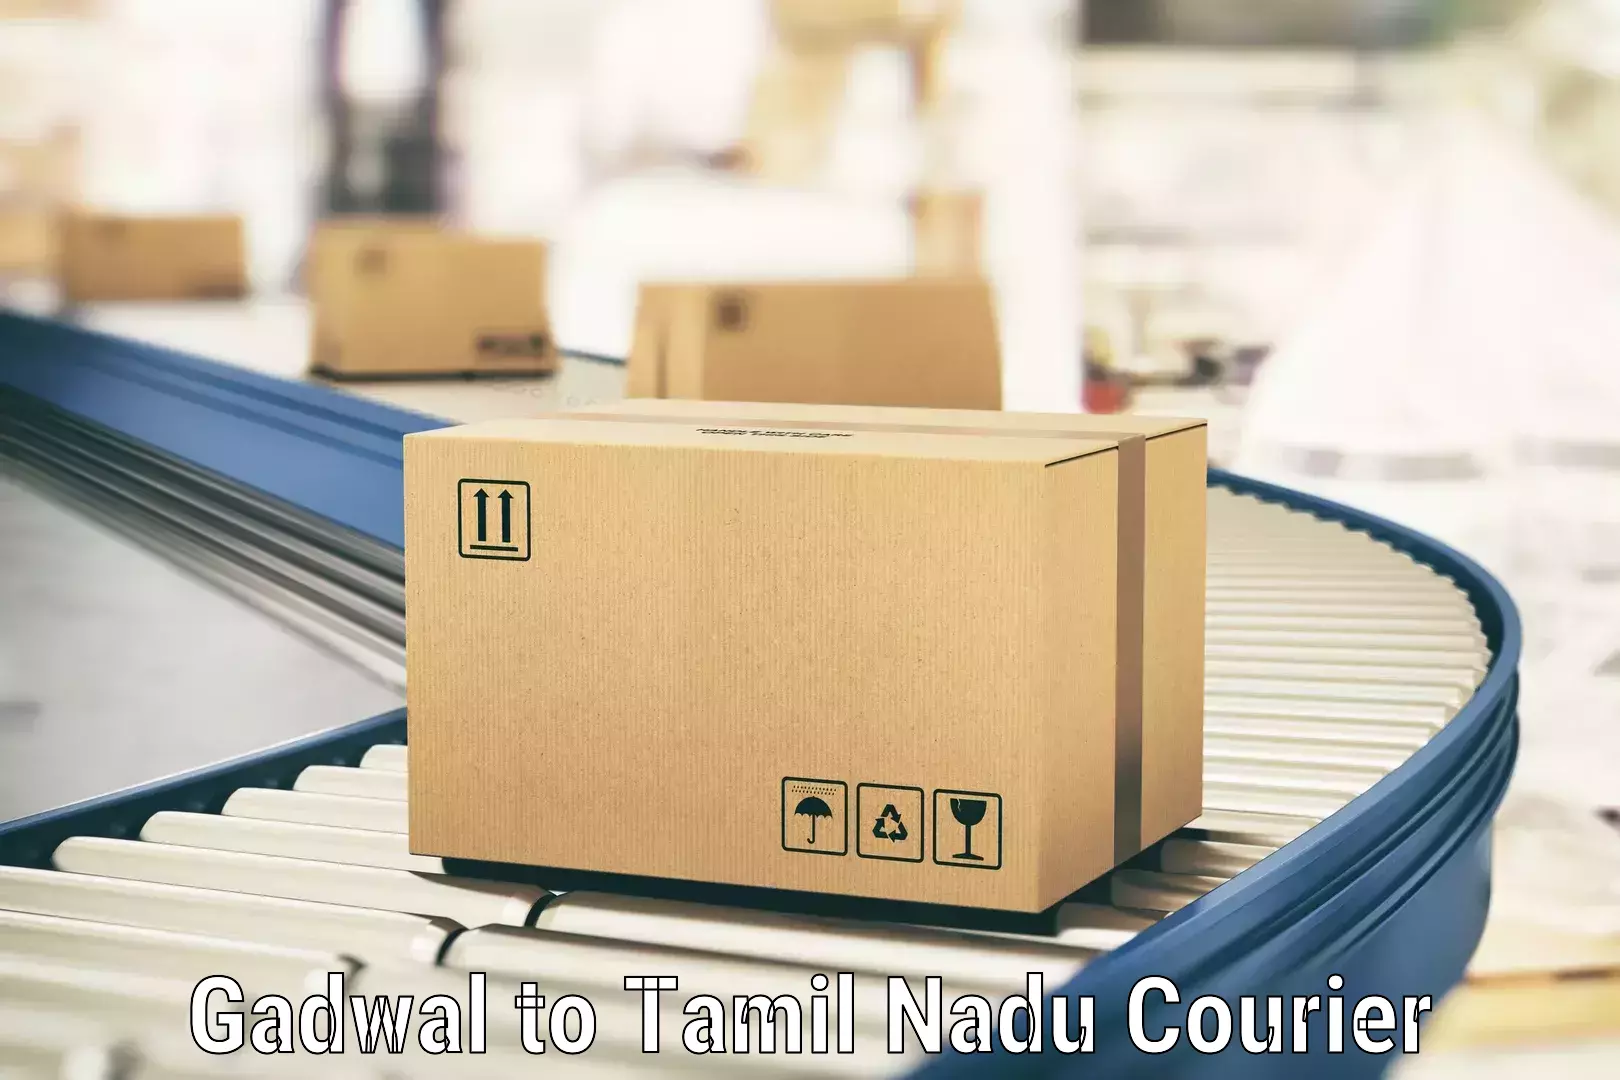 Reliable delivery network Gadwal to SRM Institute of Science and Technology Chennai